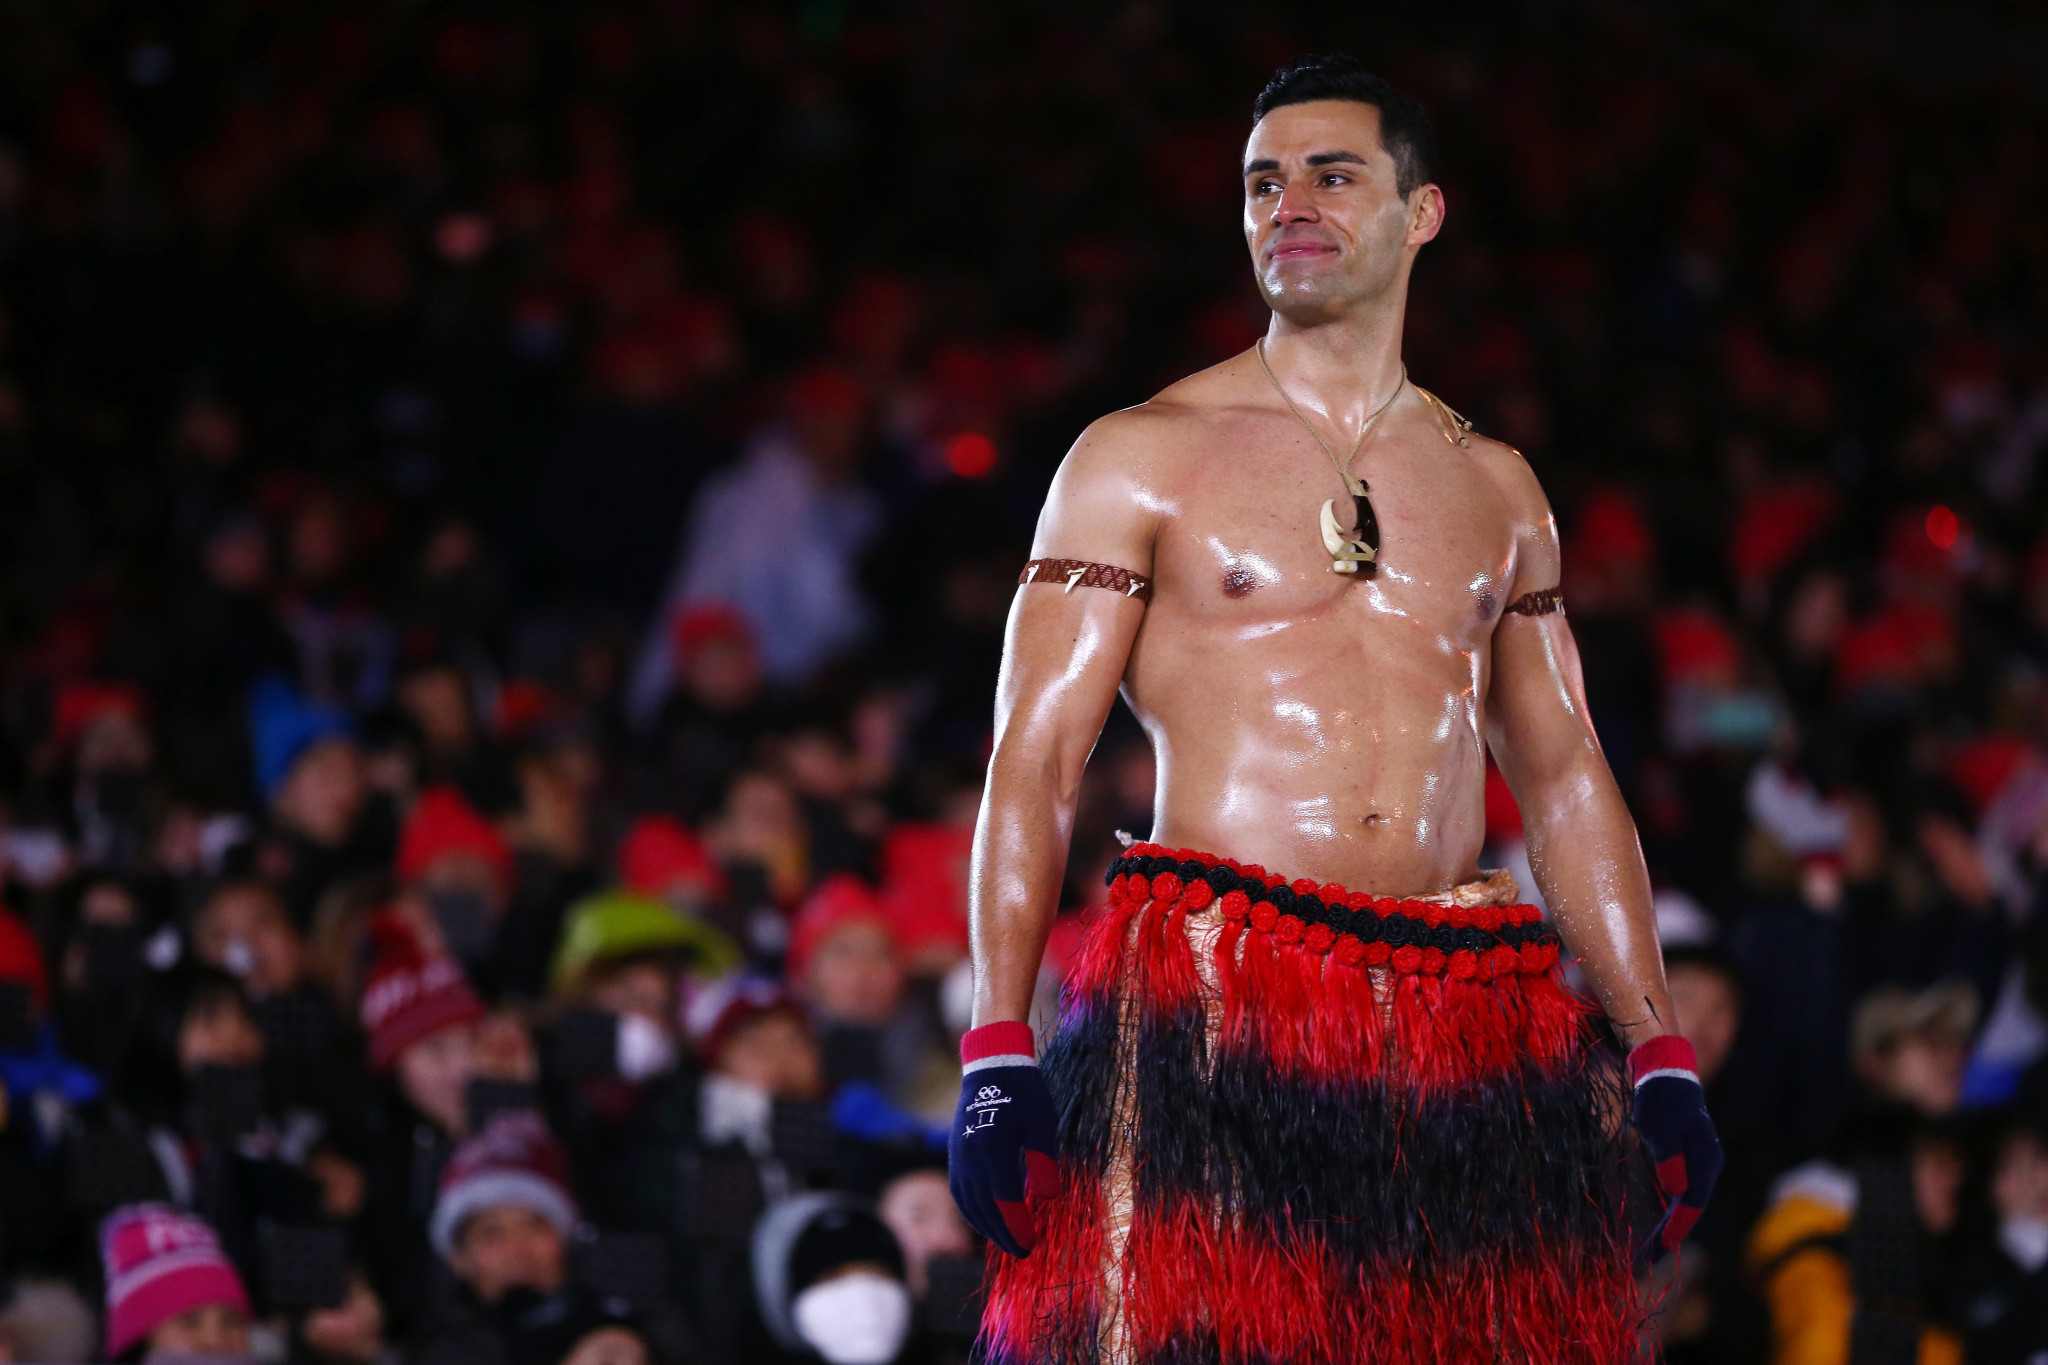 Pita Taufatofua has become the most recognisable Tongan athlete in recent times, due to his Ceremony attire ©Getty Images